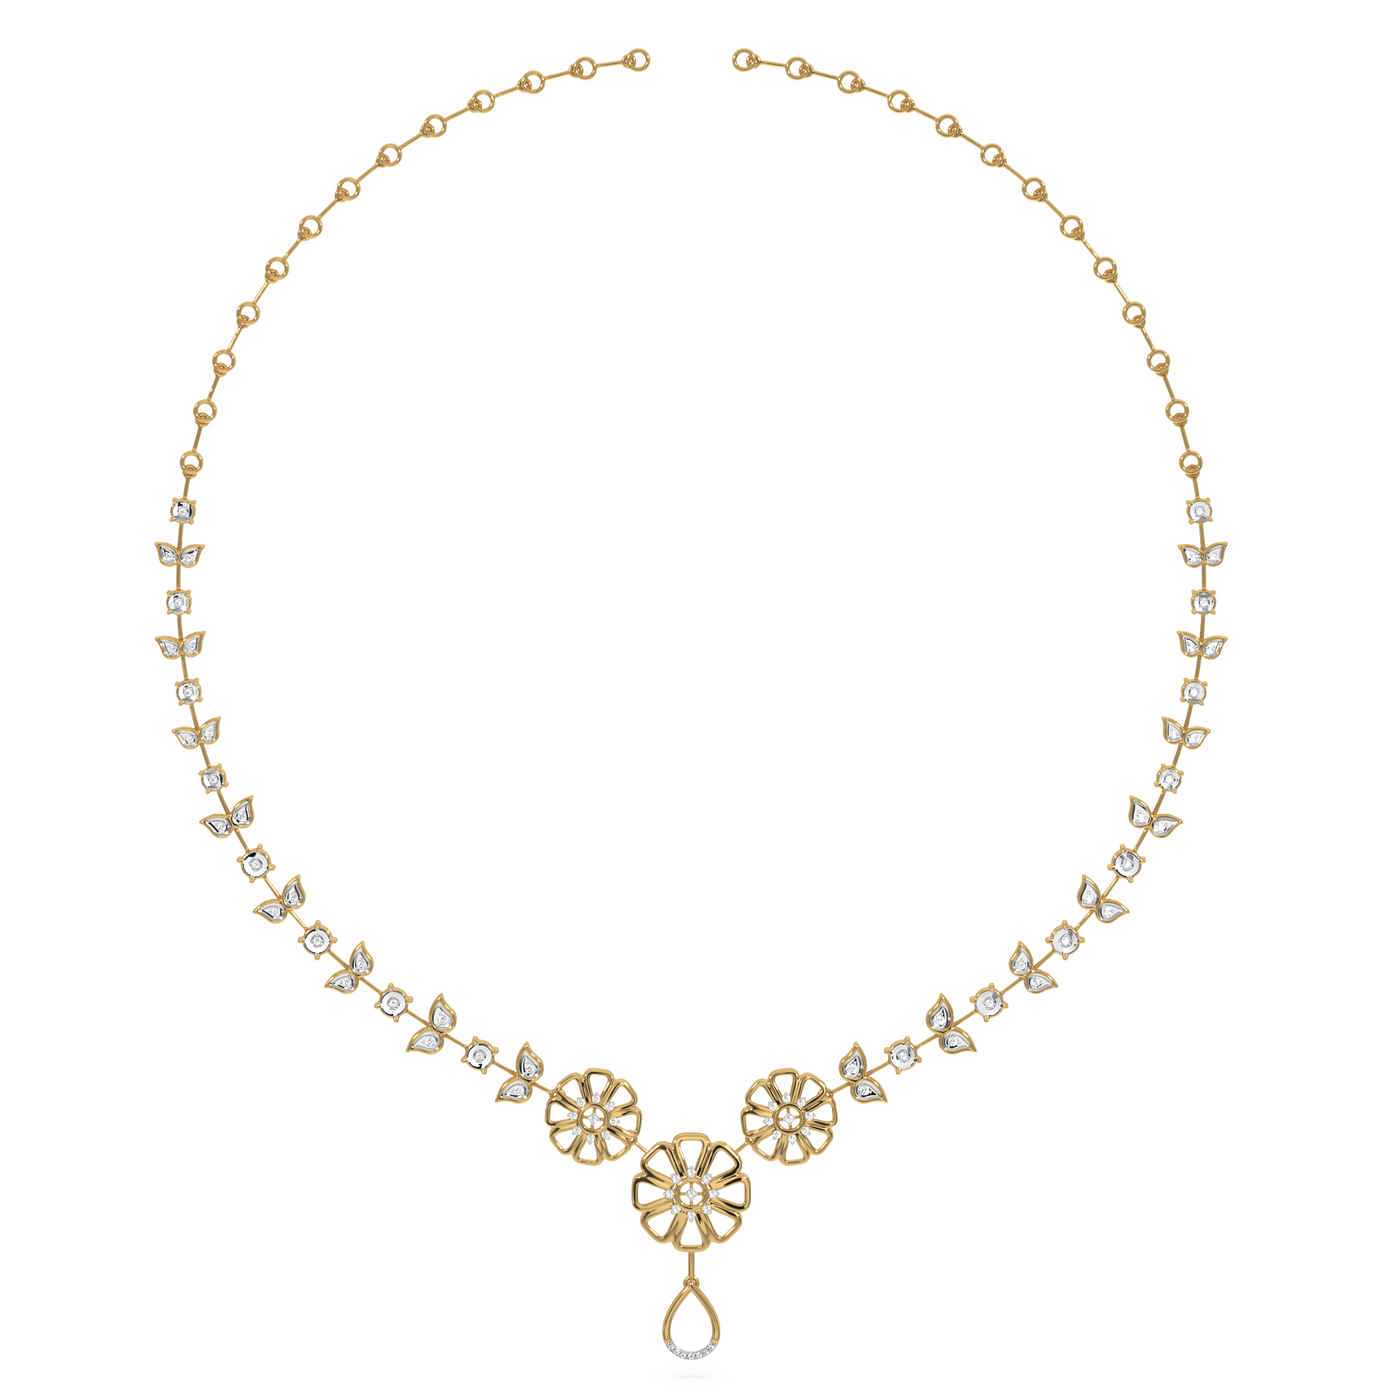 SY Women's Necklace in Gold, Royal Radiance